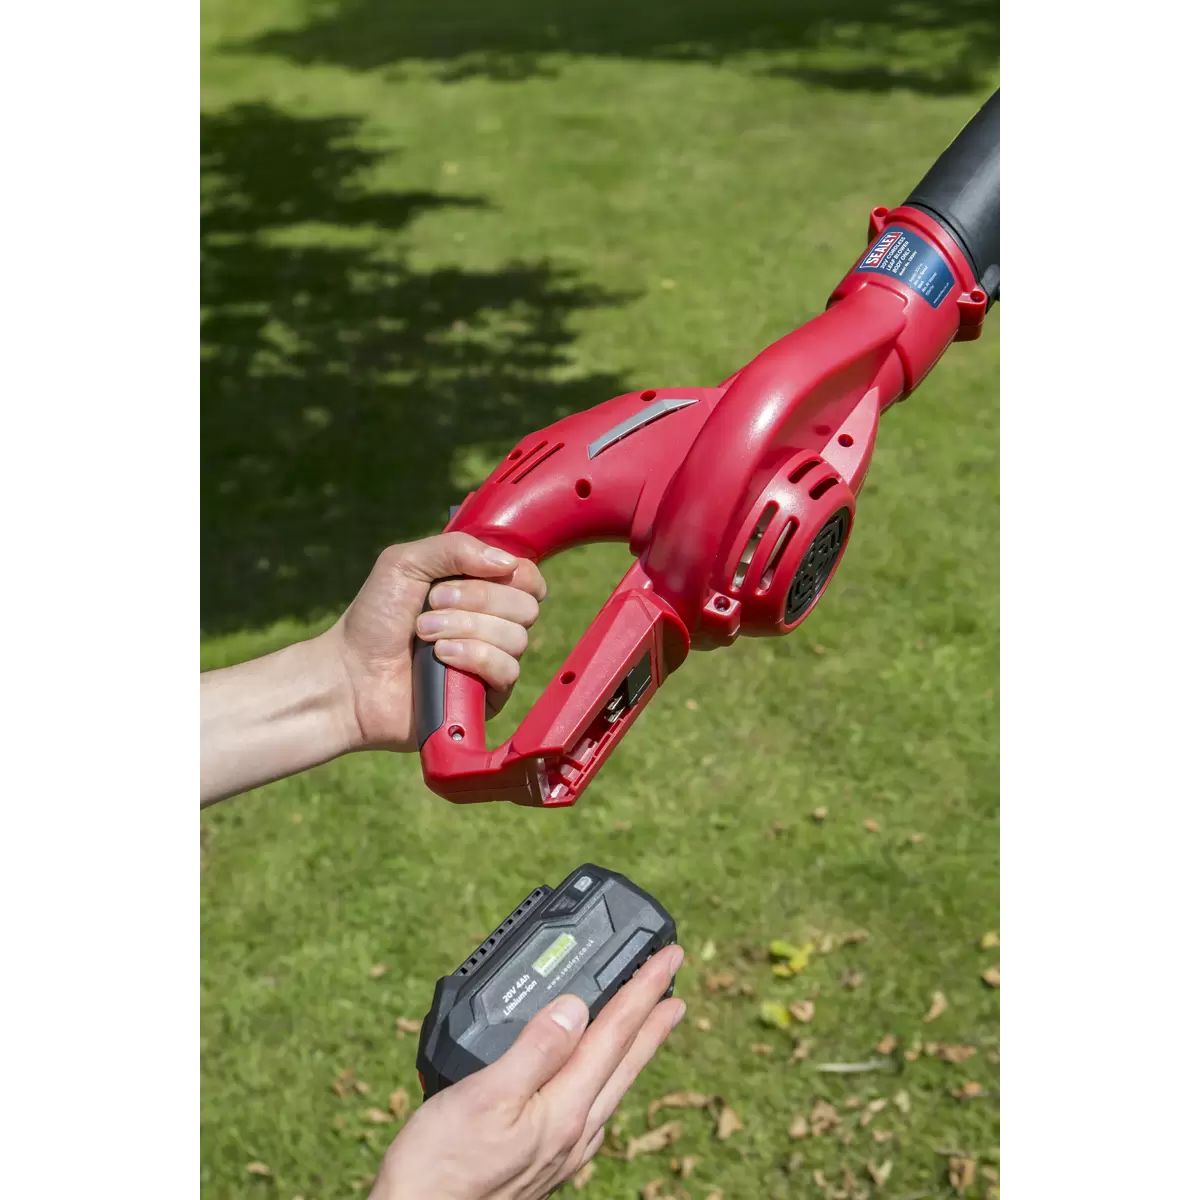 Sealey CB20VCOMBO4 Leaf Blower Cordless 20V with 1 x 4Ah Battery & Charger